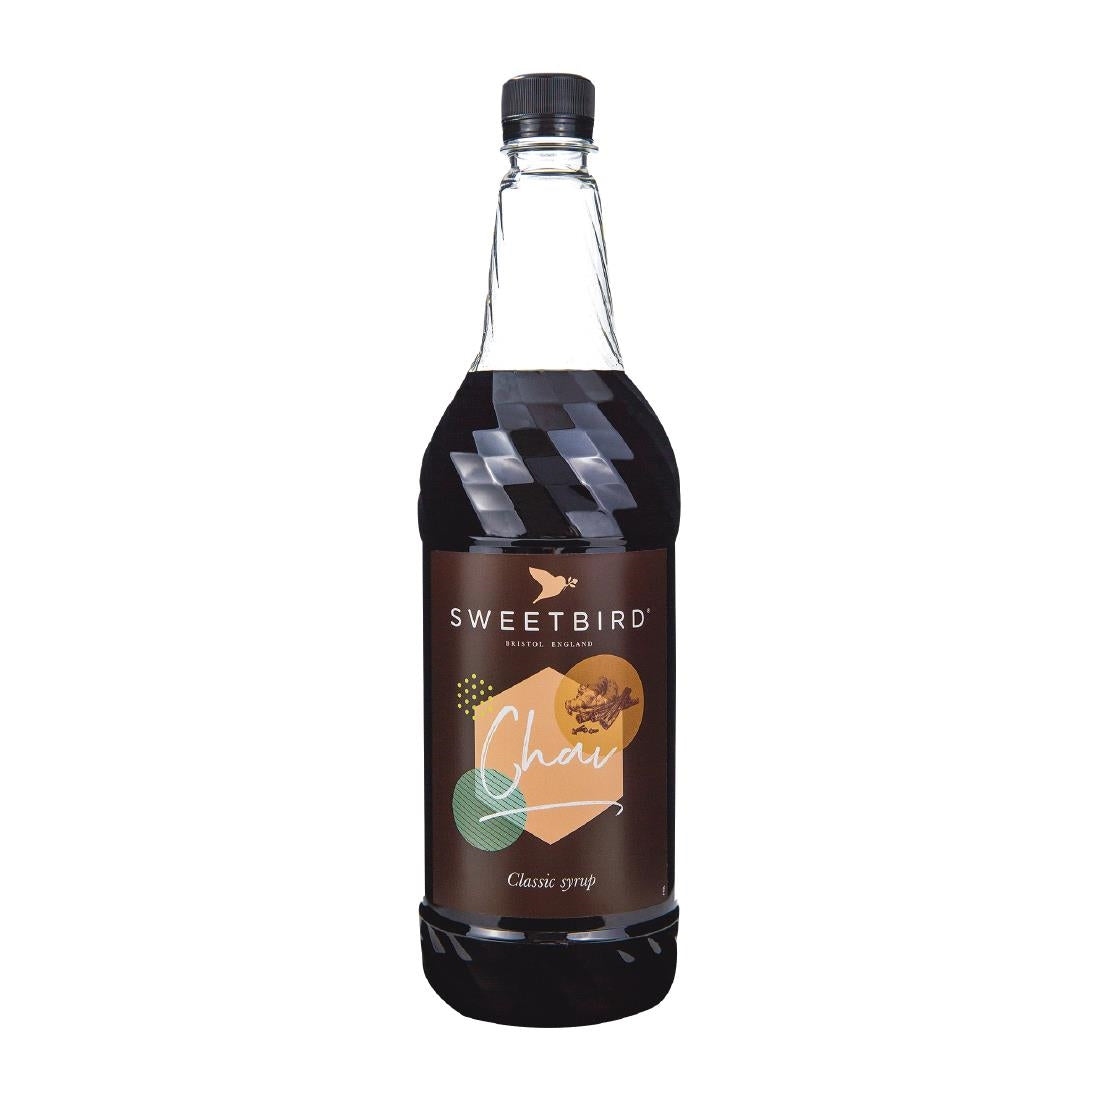 FS241 Sweetbird Chai Syrup 1 Ltr JD Catering Equipment Solutions Ltd